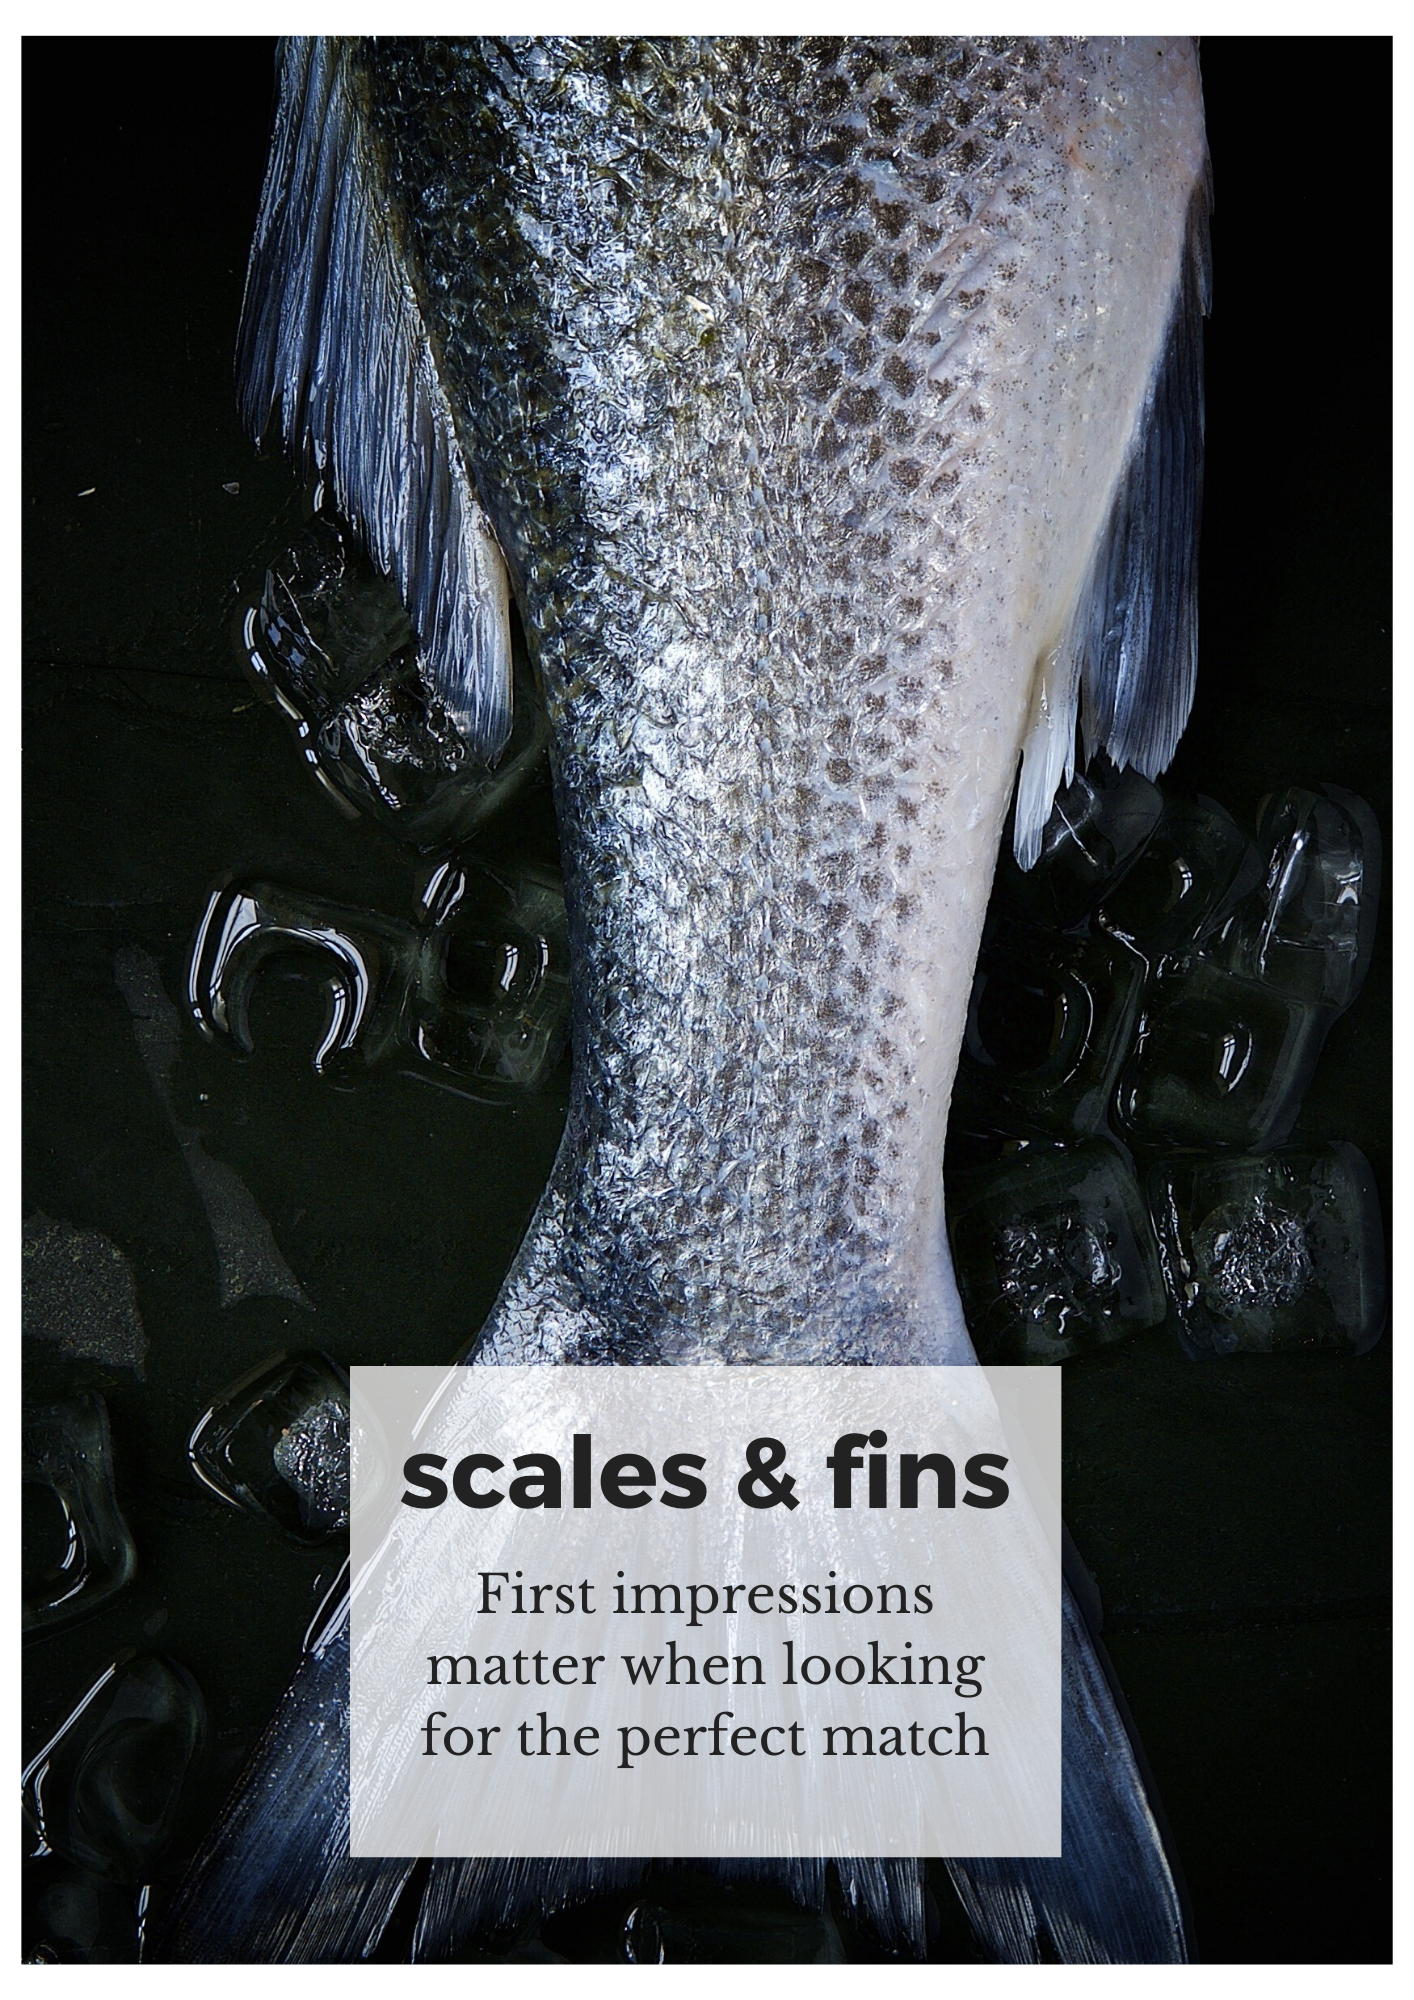 Scales & Fins